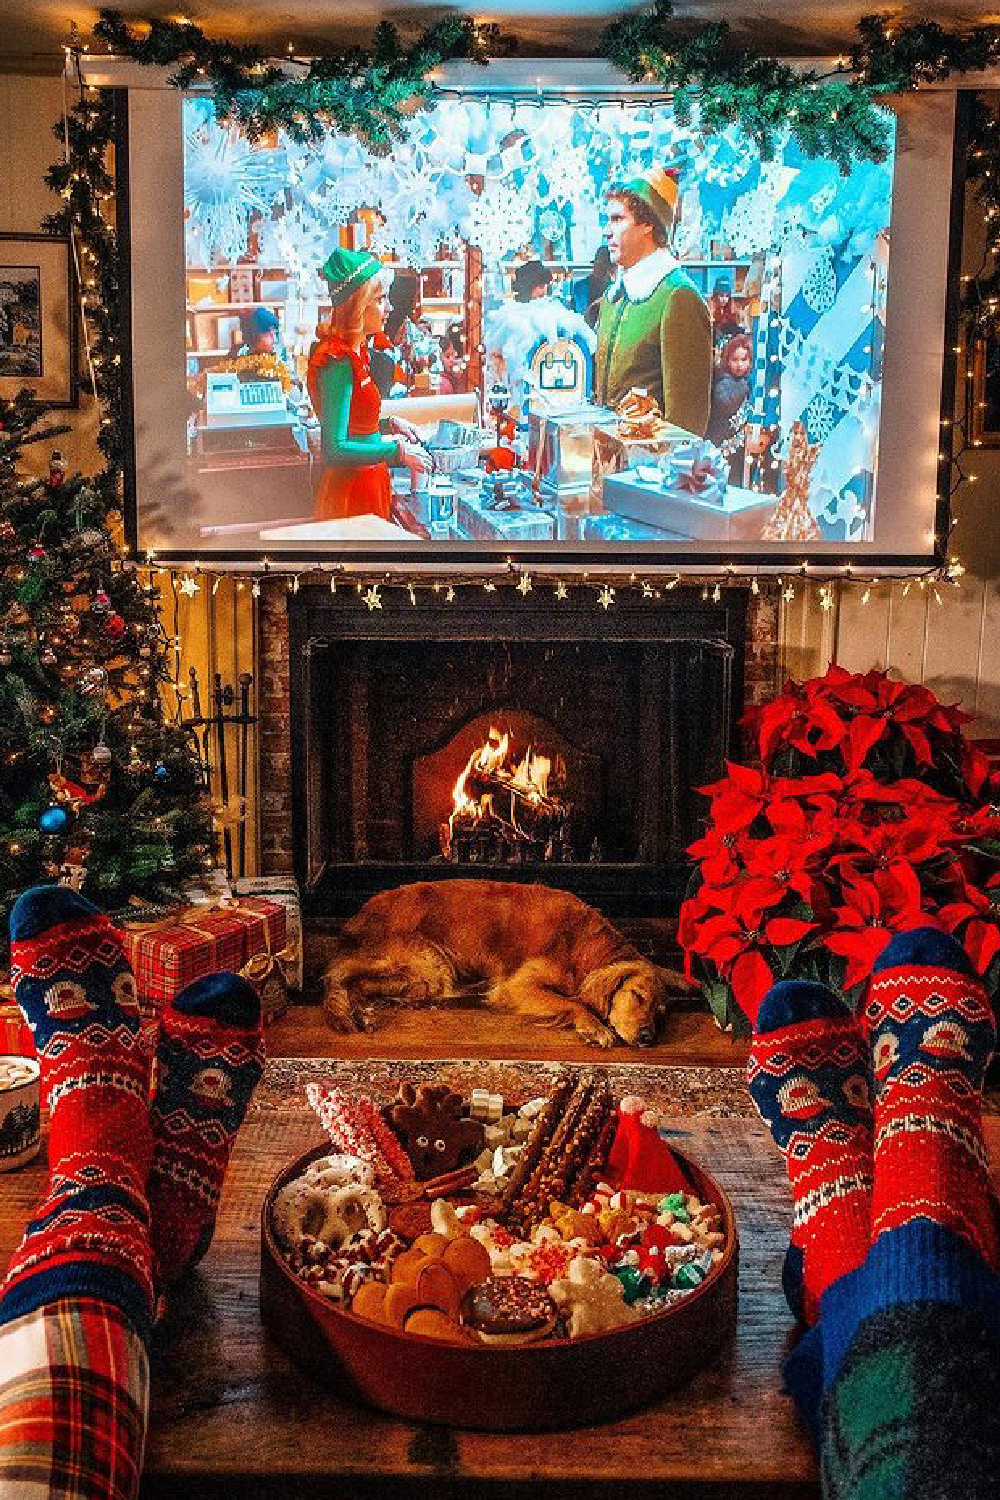 Elf movie night projected in Christmas cozy living room - @tilldeathdousart. #elfmovienight #christmascozy